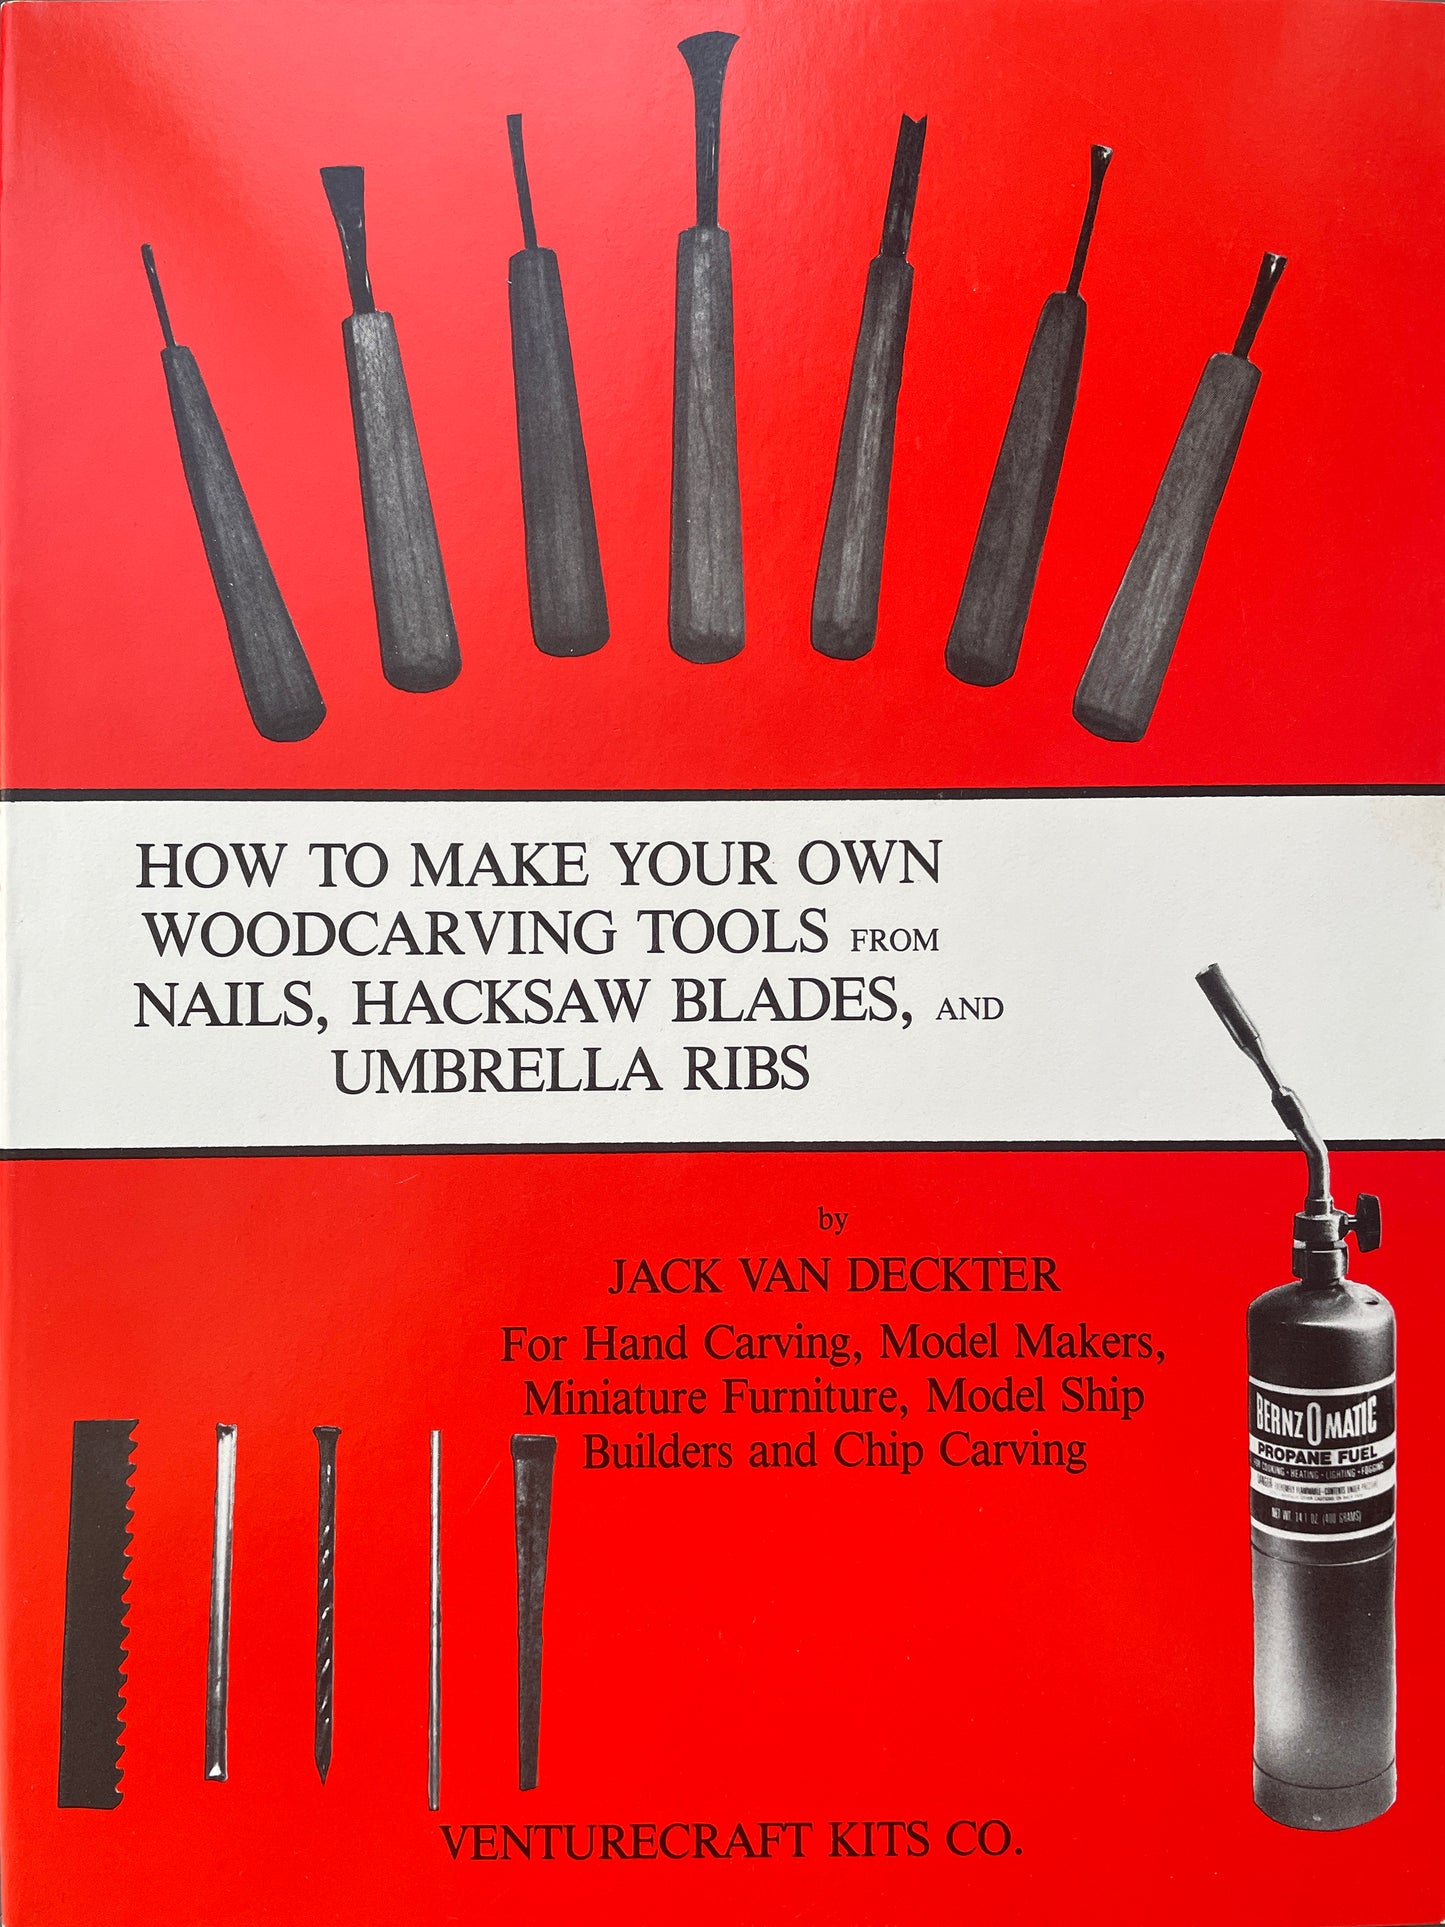 How to Make Your Own Woodcarving Tools from Nails, Hacksaw Blades, Umbrella Ribs, and Scrap Metal